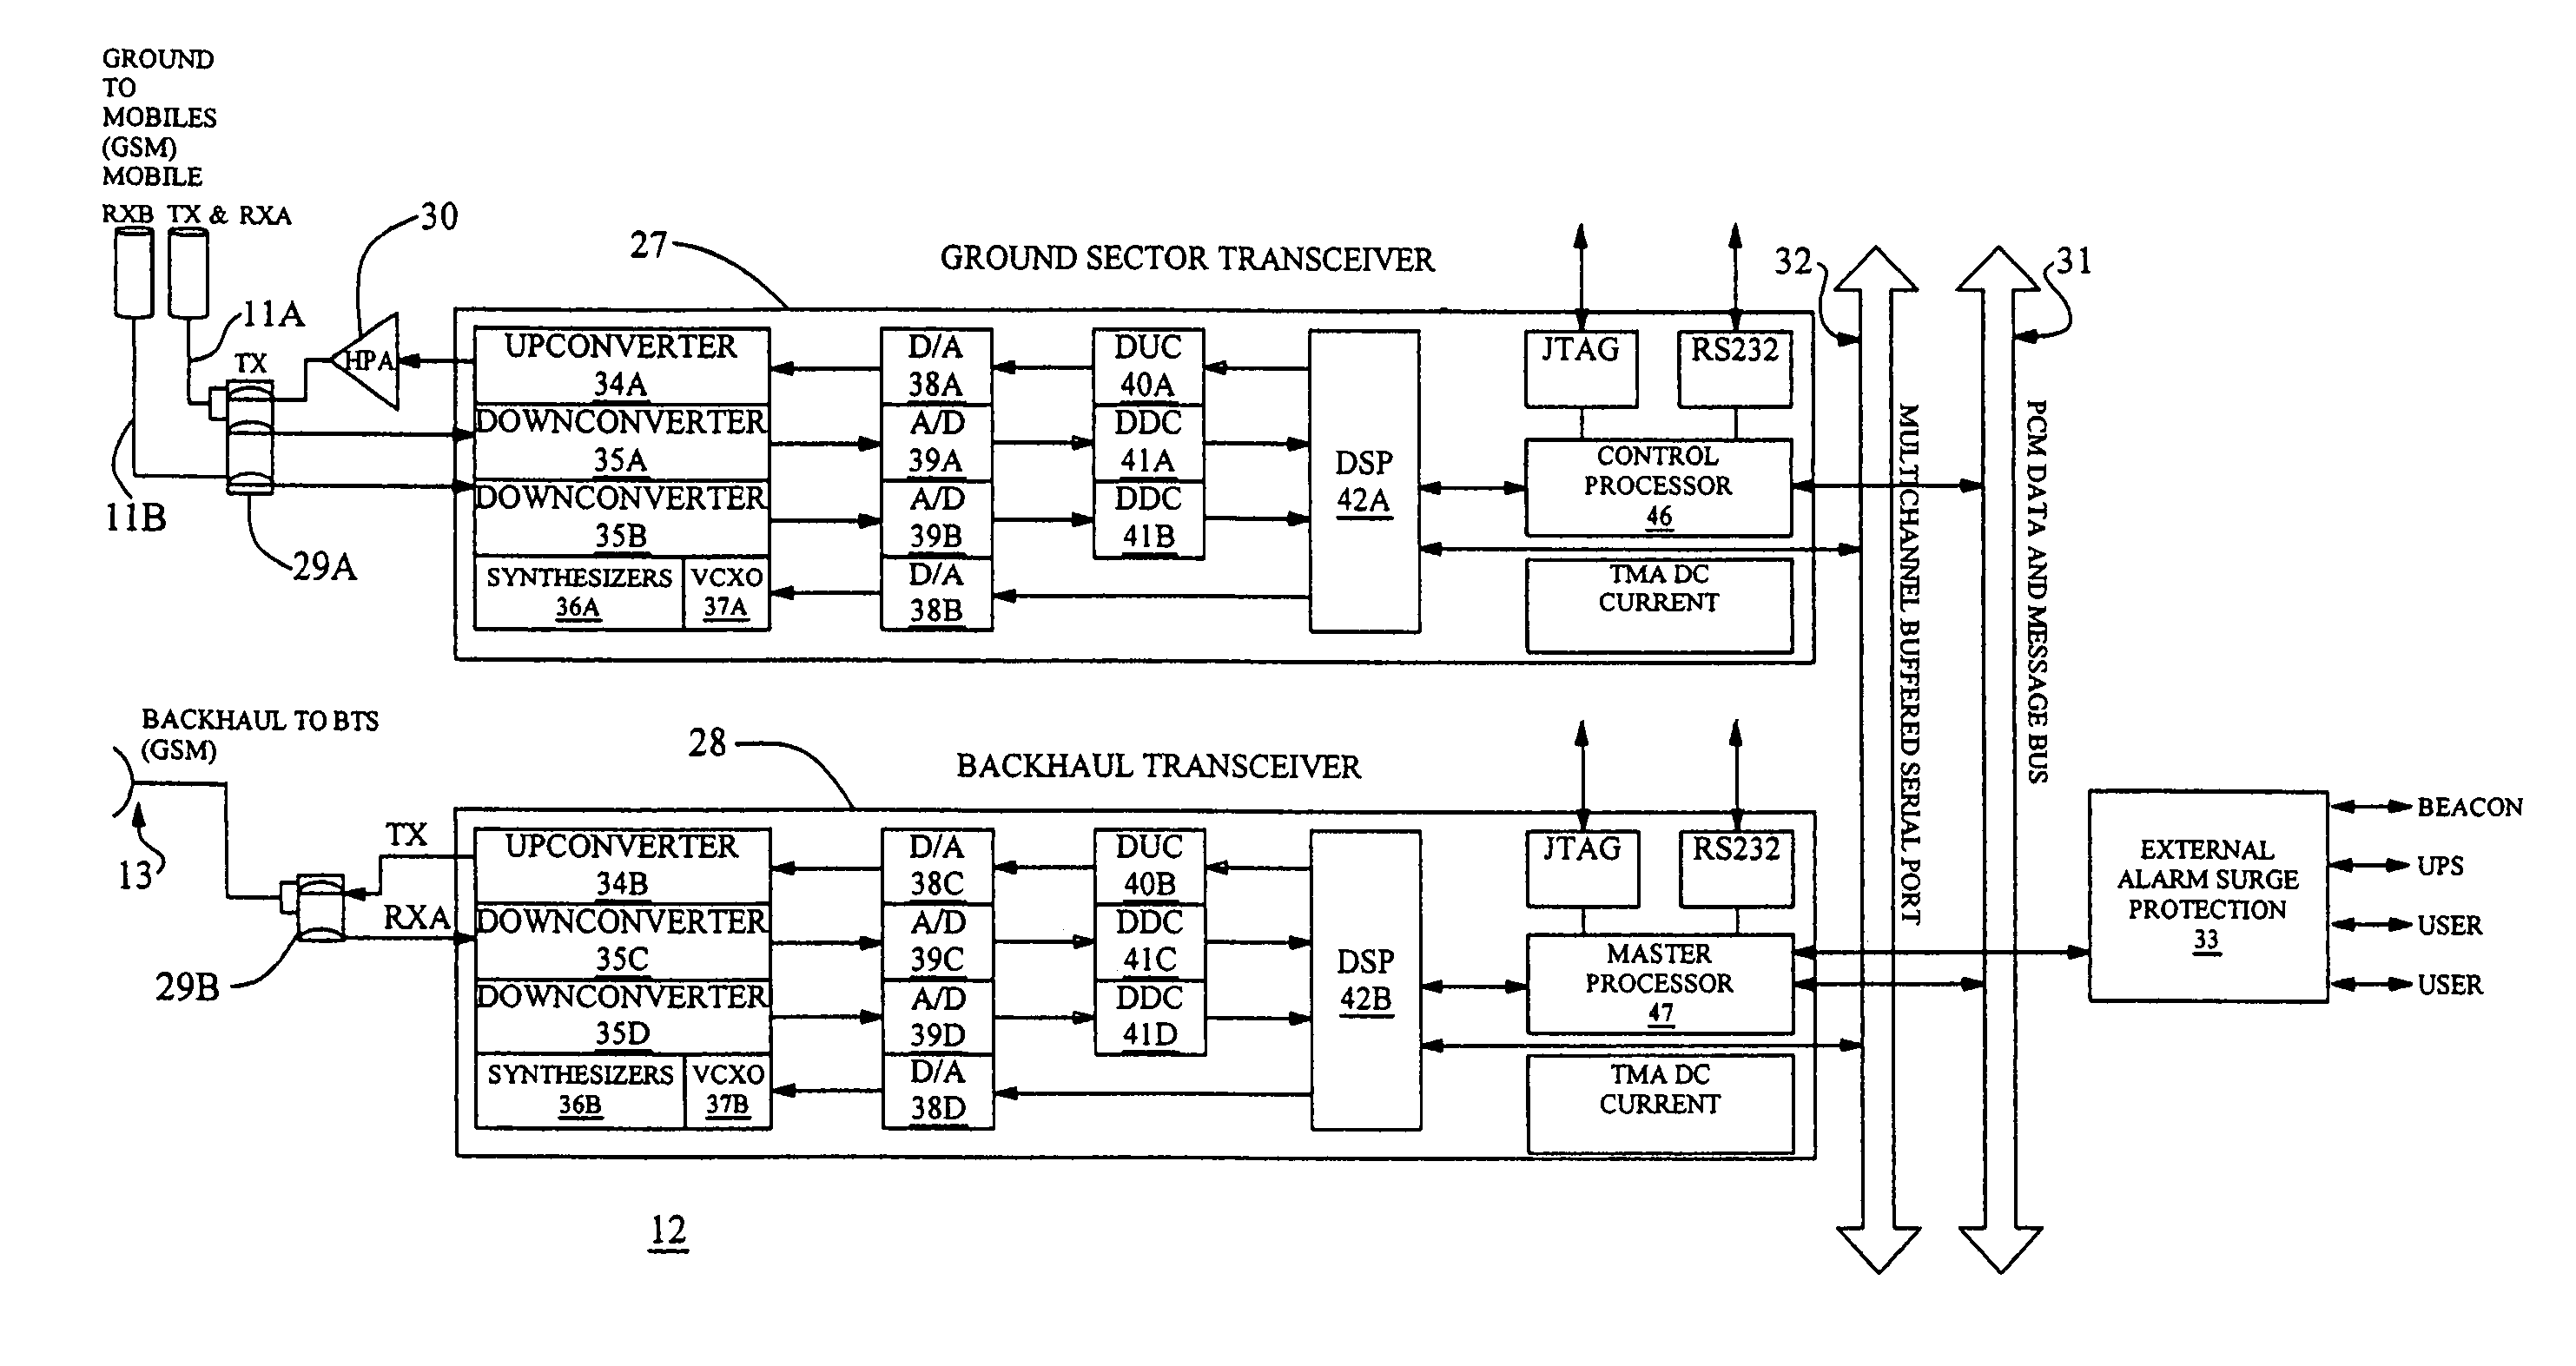 Packet based backhaul channel configuration for a wireless repeater